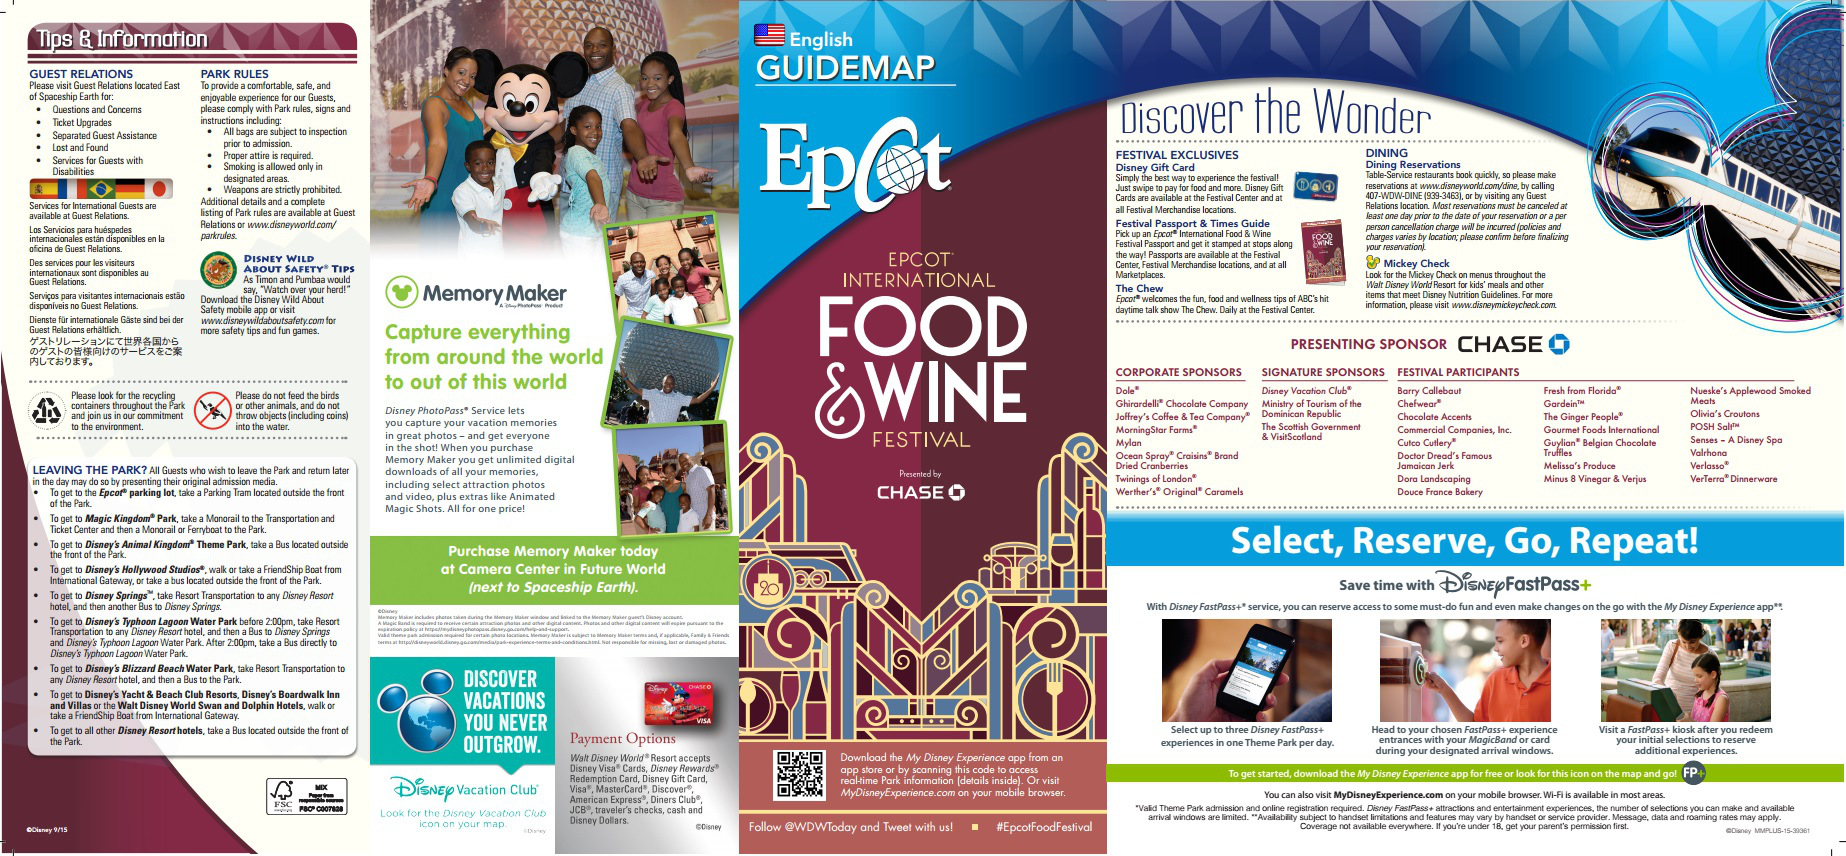 The 20th Epcot International Food & Wine Festival Opens today!